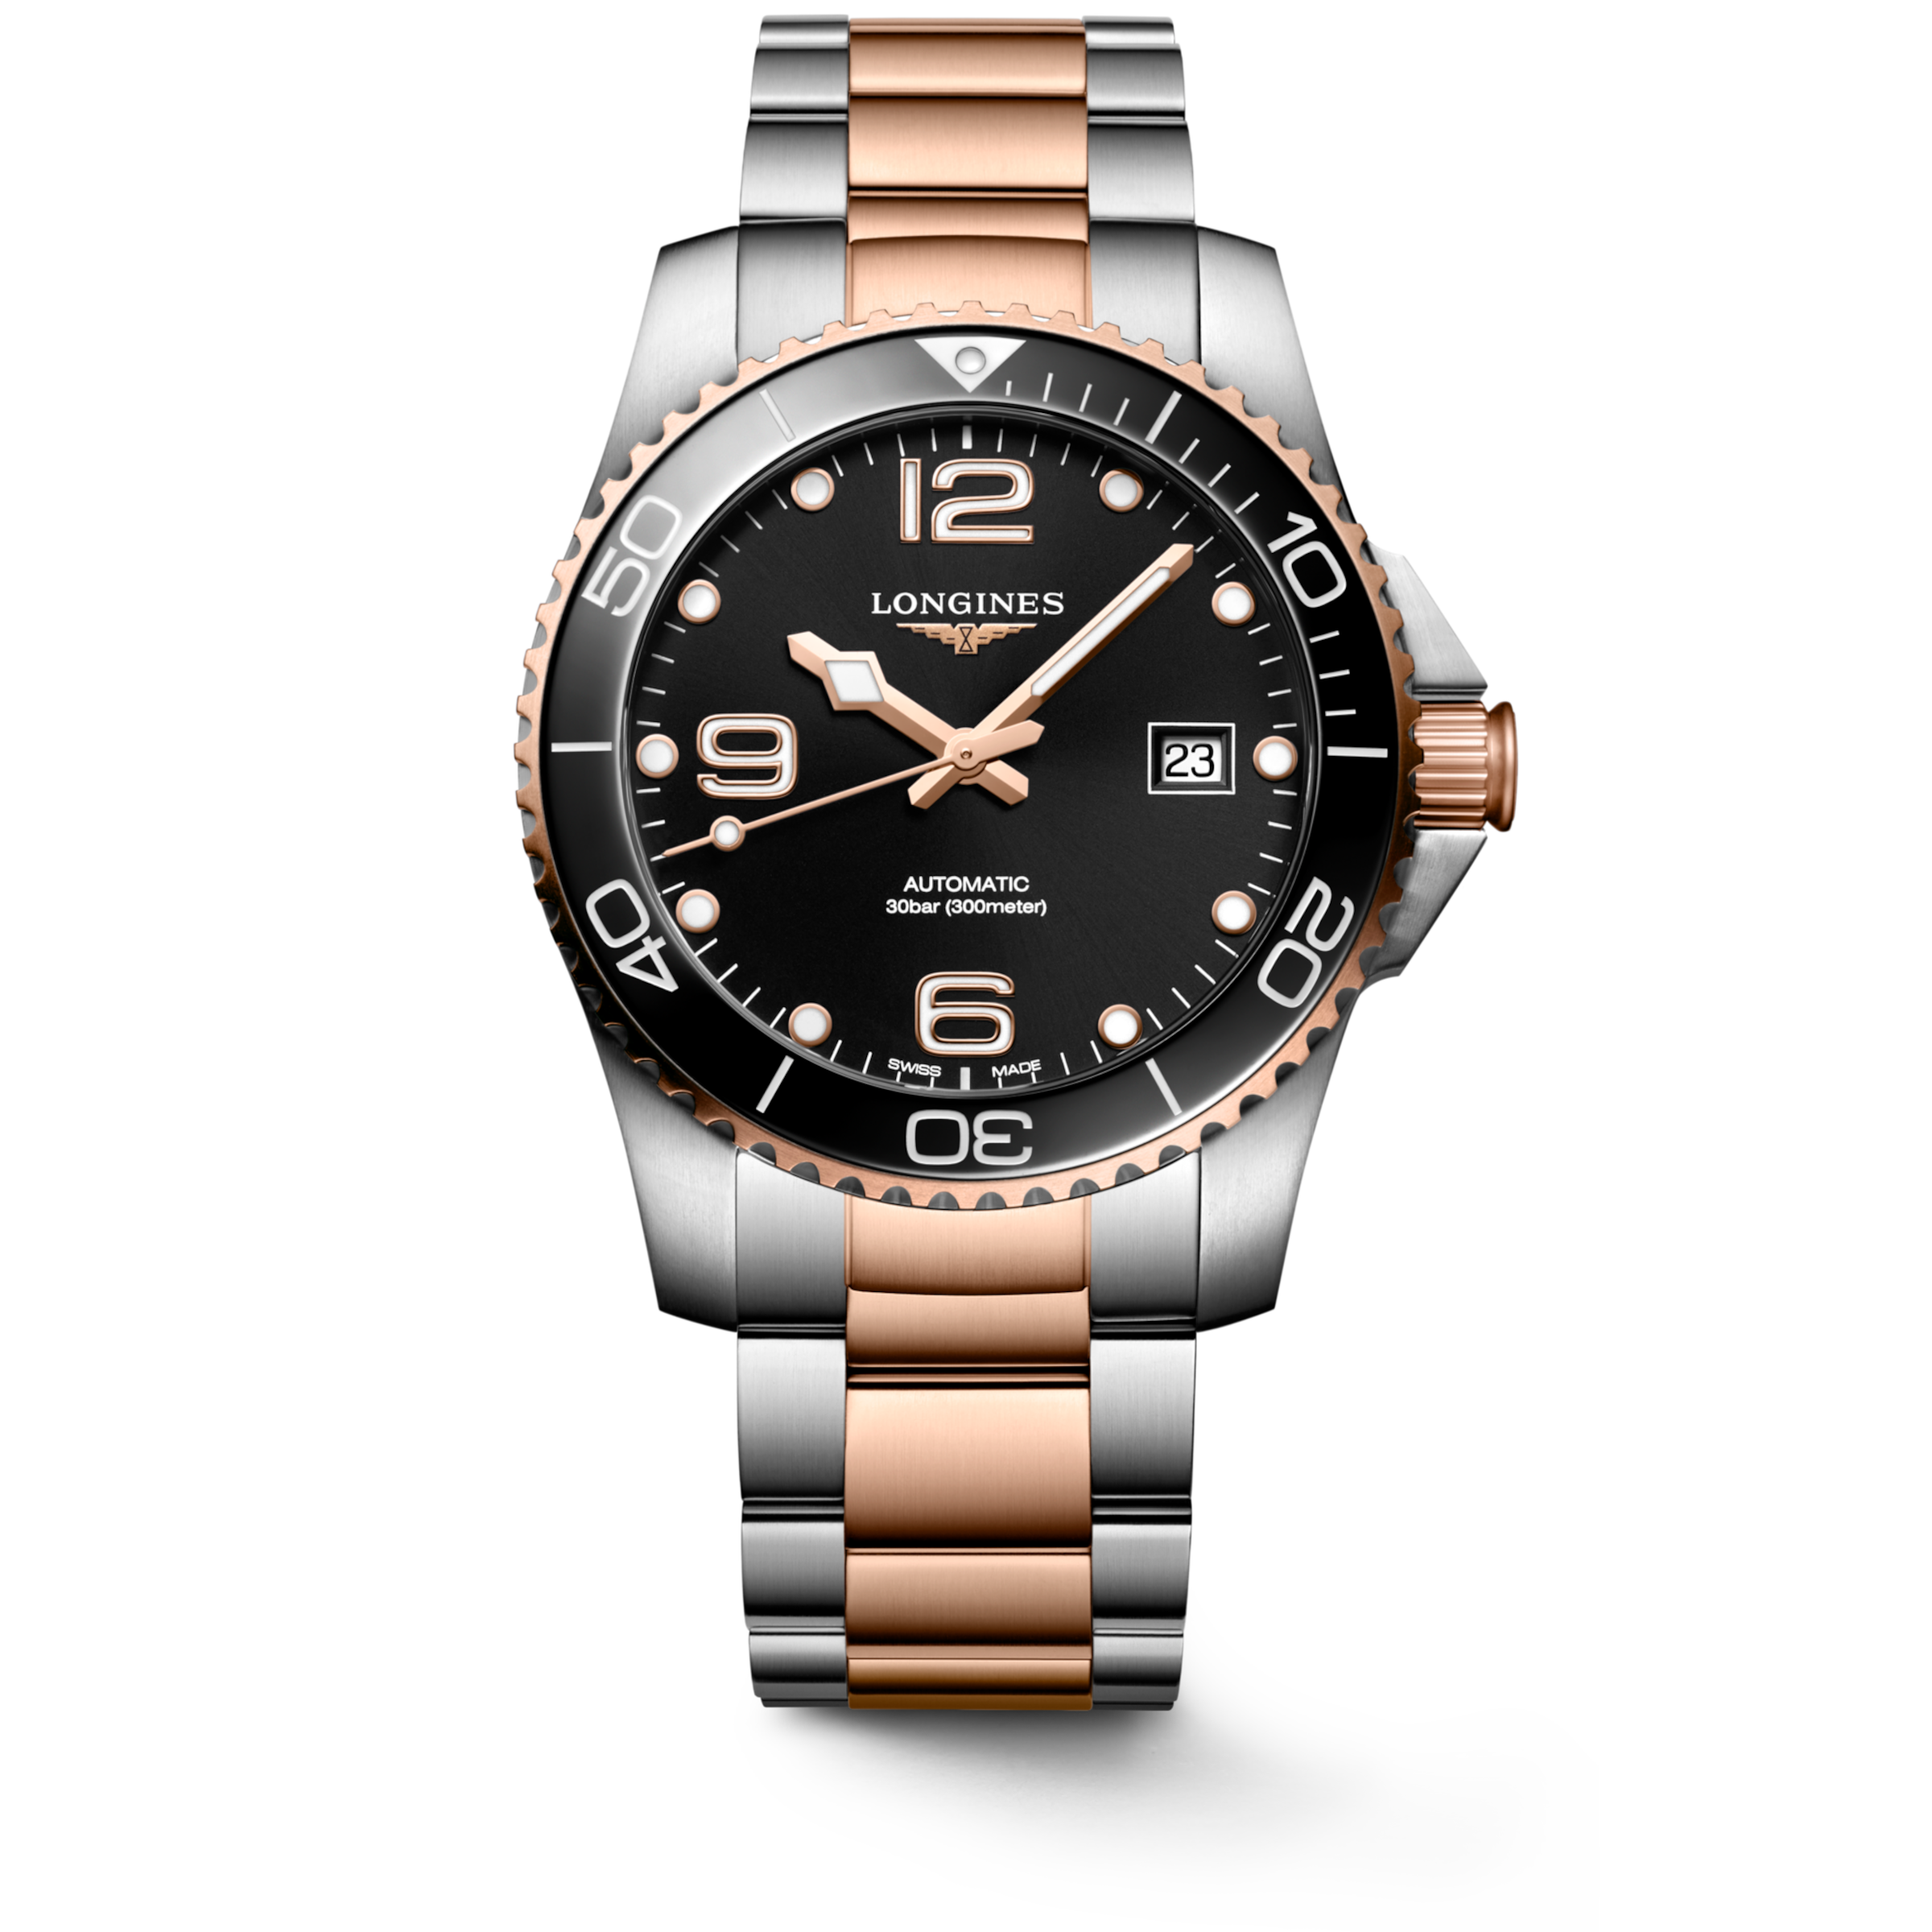 Longines HYDROCONQUEST Automatic Stainless steel and ceramic bezel Watch - L3.781.3.58.7